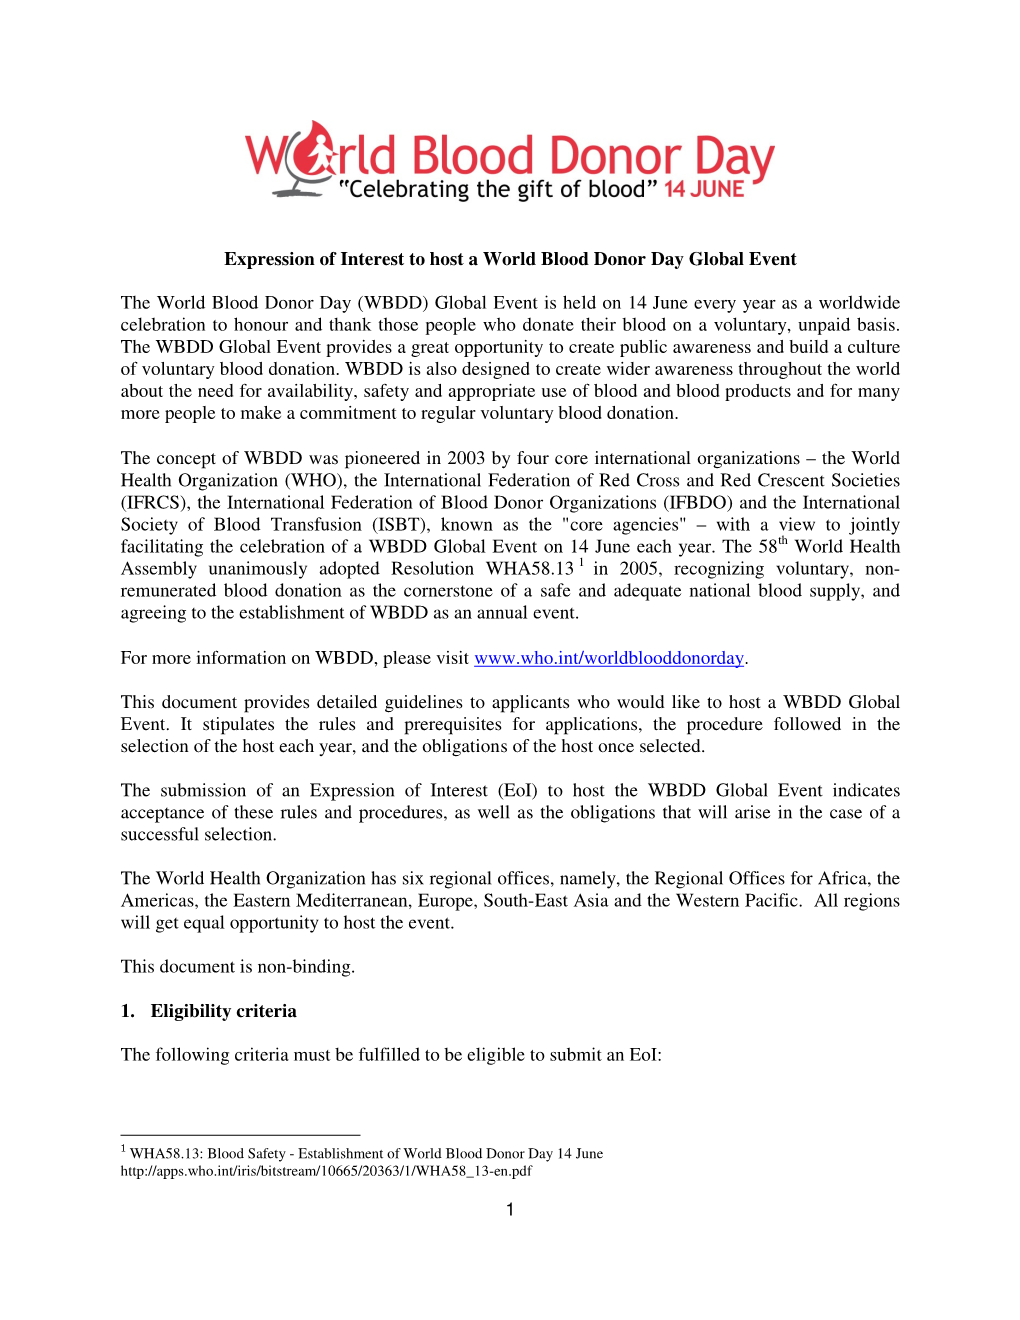 WBDD) Global Event Is Held on 14 June Every Year As a Worldwide Celebration to Honour and Thank Those People Who Donate Their Blood on a Voluntary, Unpaid Basis